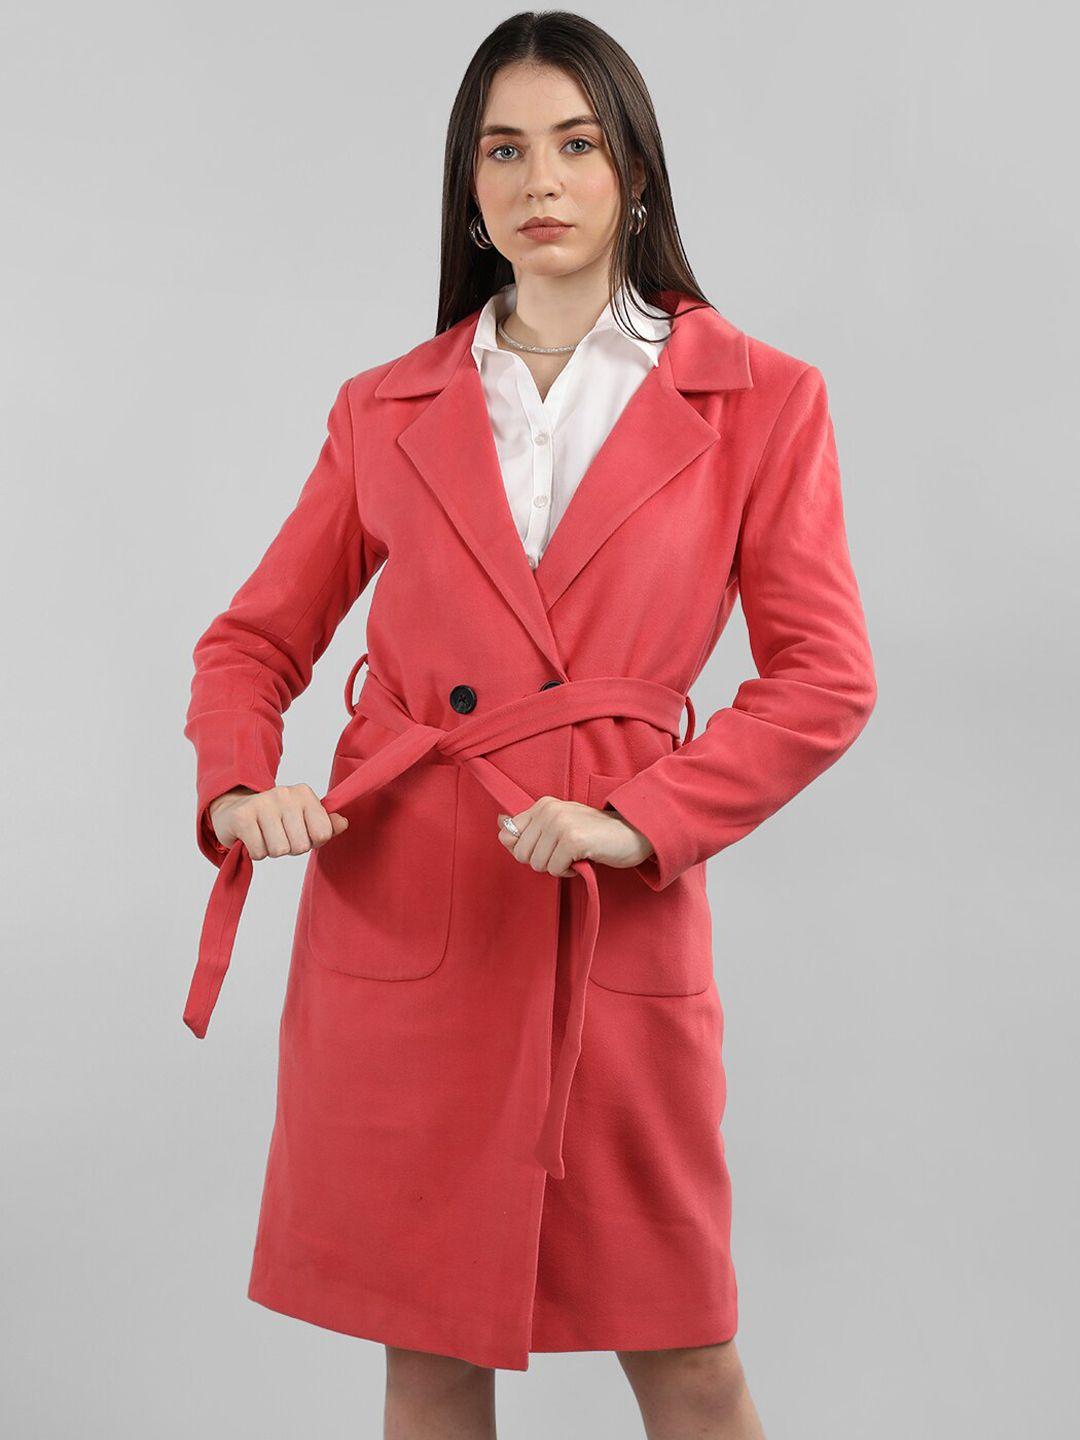 chkokko notched lapel collar double-breasted woollen trench coats